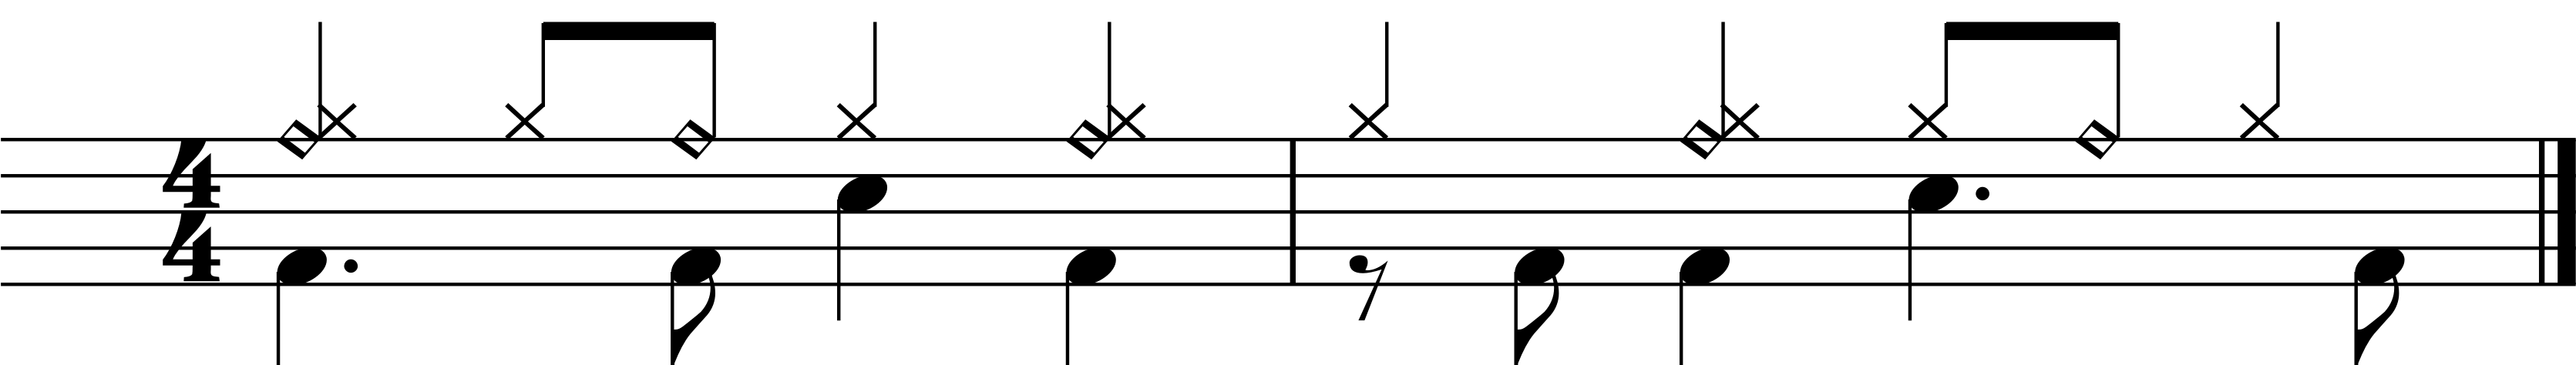 A free groove lesson combining straight rhythms and a bosa nova